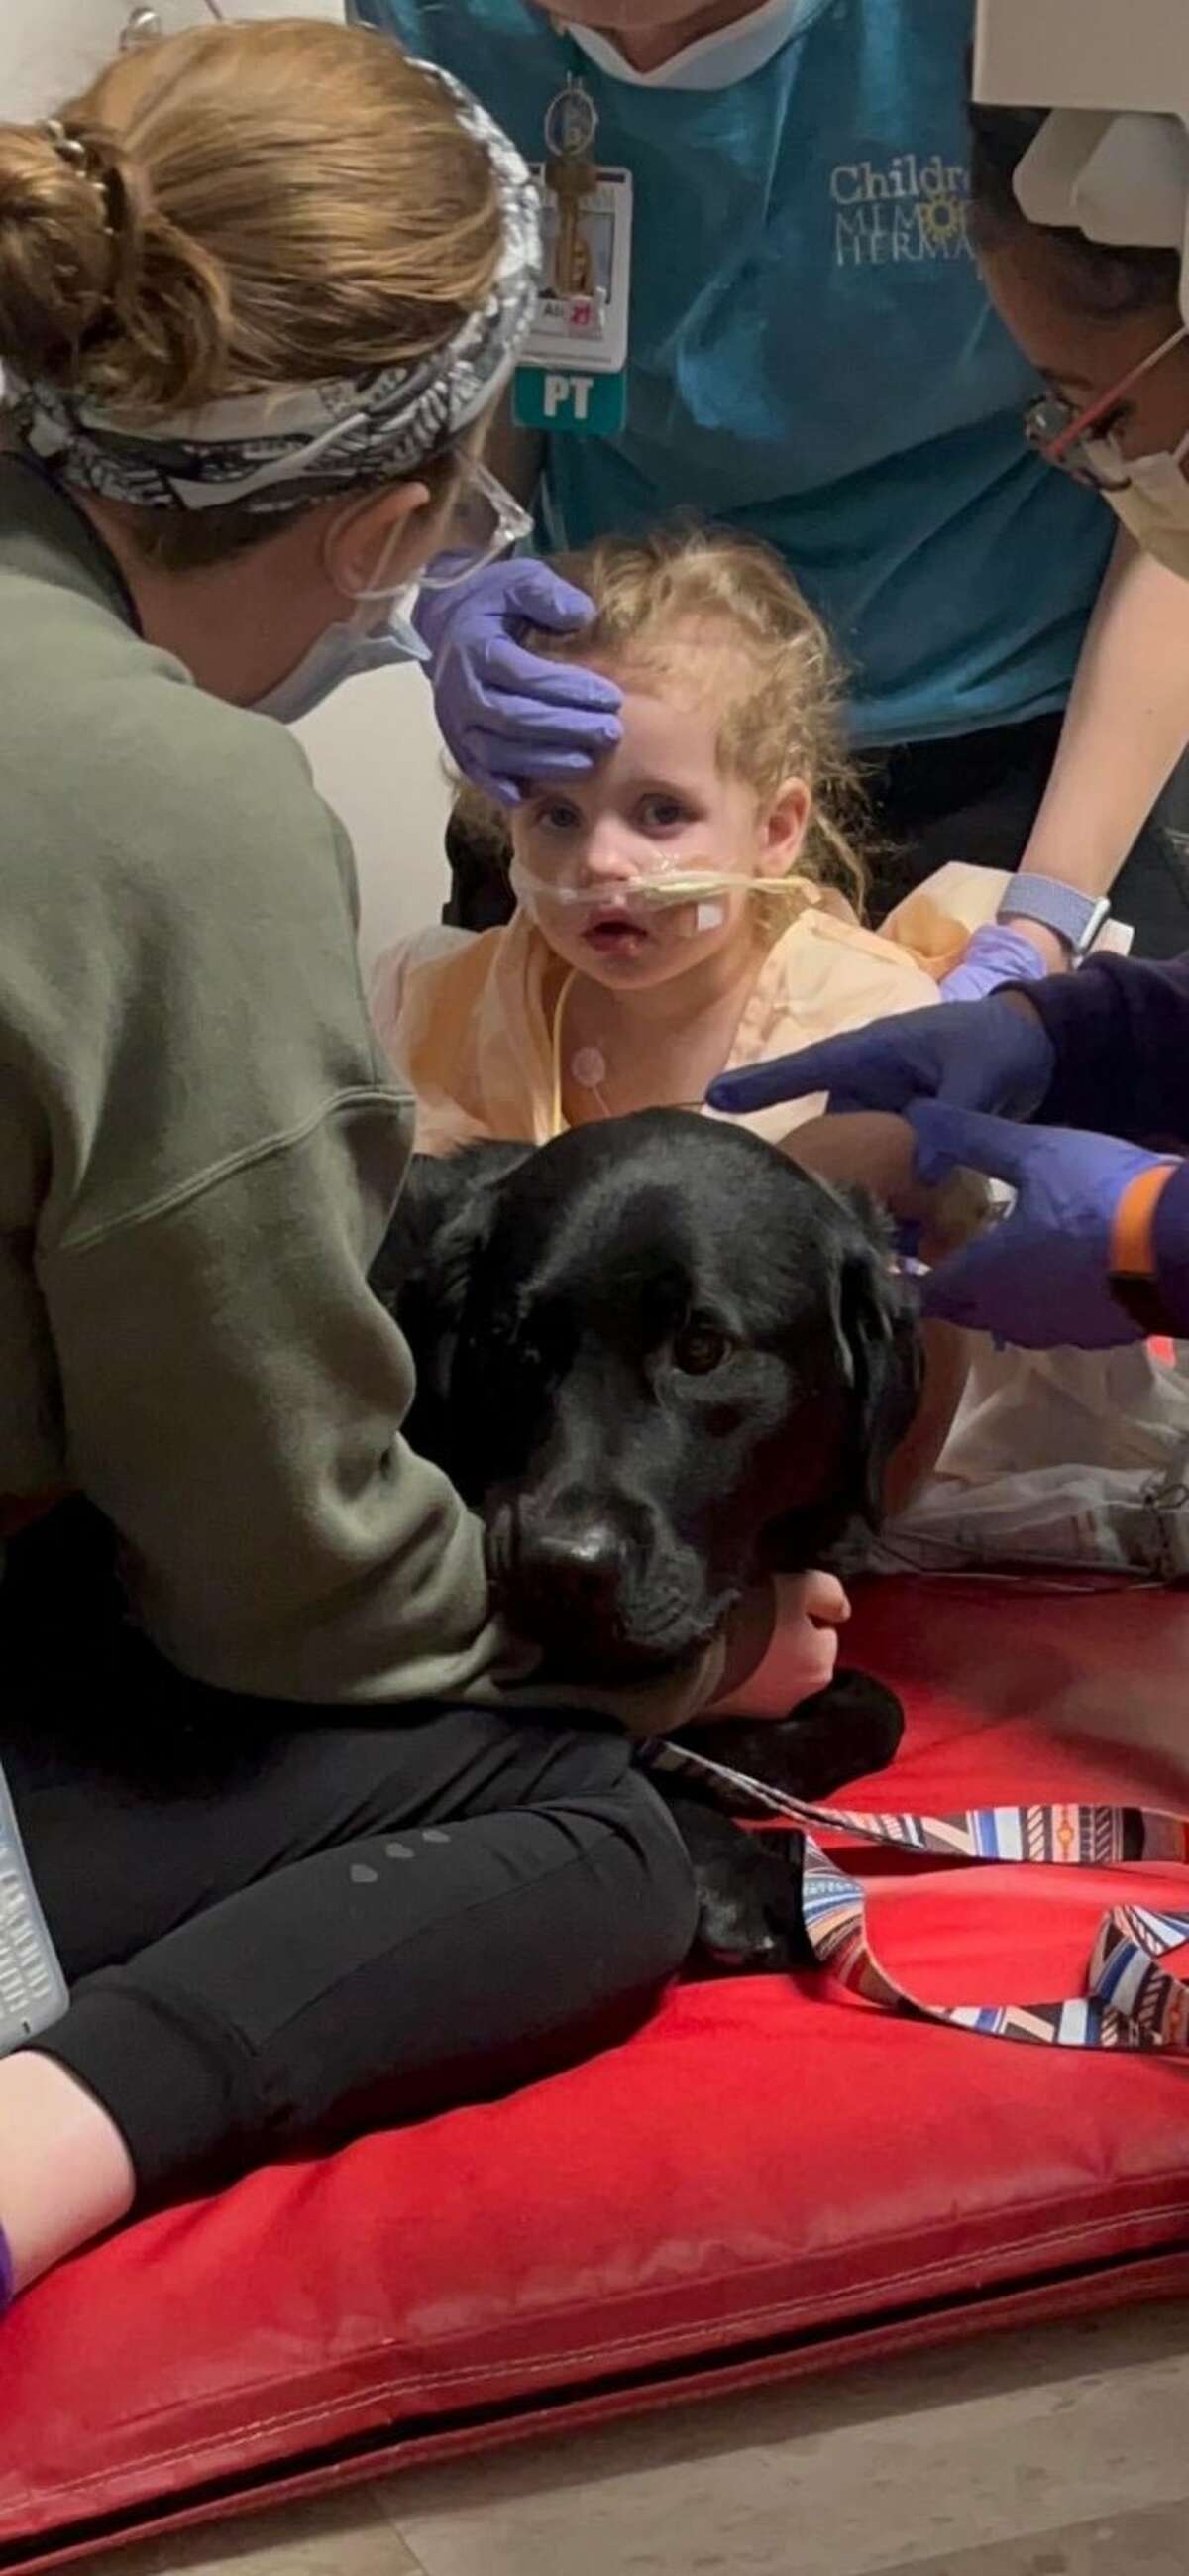 Tessa Aycock, 2, interacts with a Children's Memorial Hermann facility dog while receiving treatment for injuries sustained from falling in a pond on her family's property in East Texas.